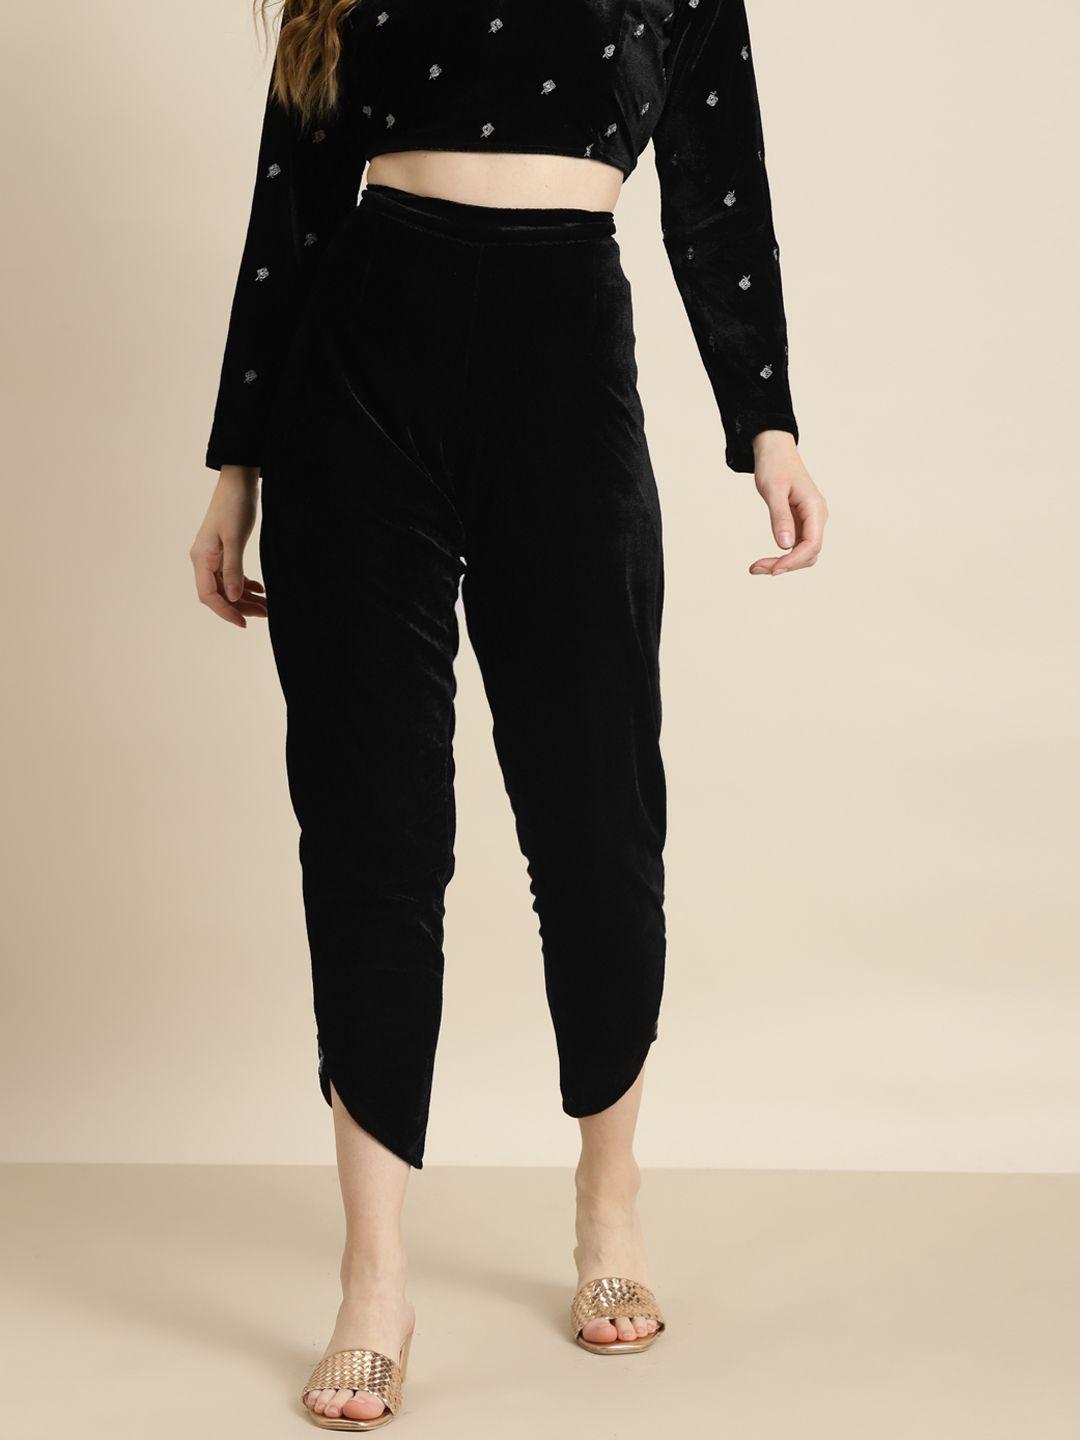 shae-by-sassafras-women-black-embroidered-trousers